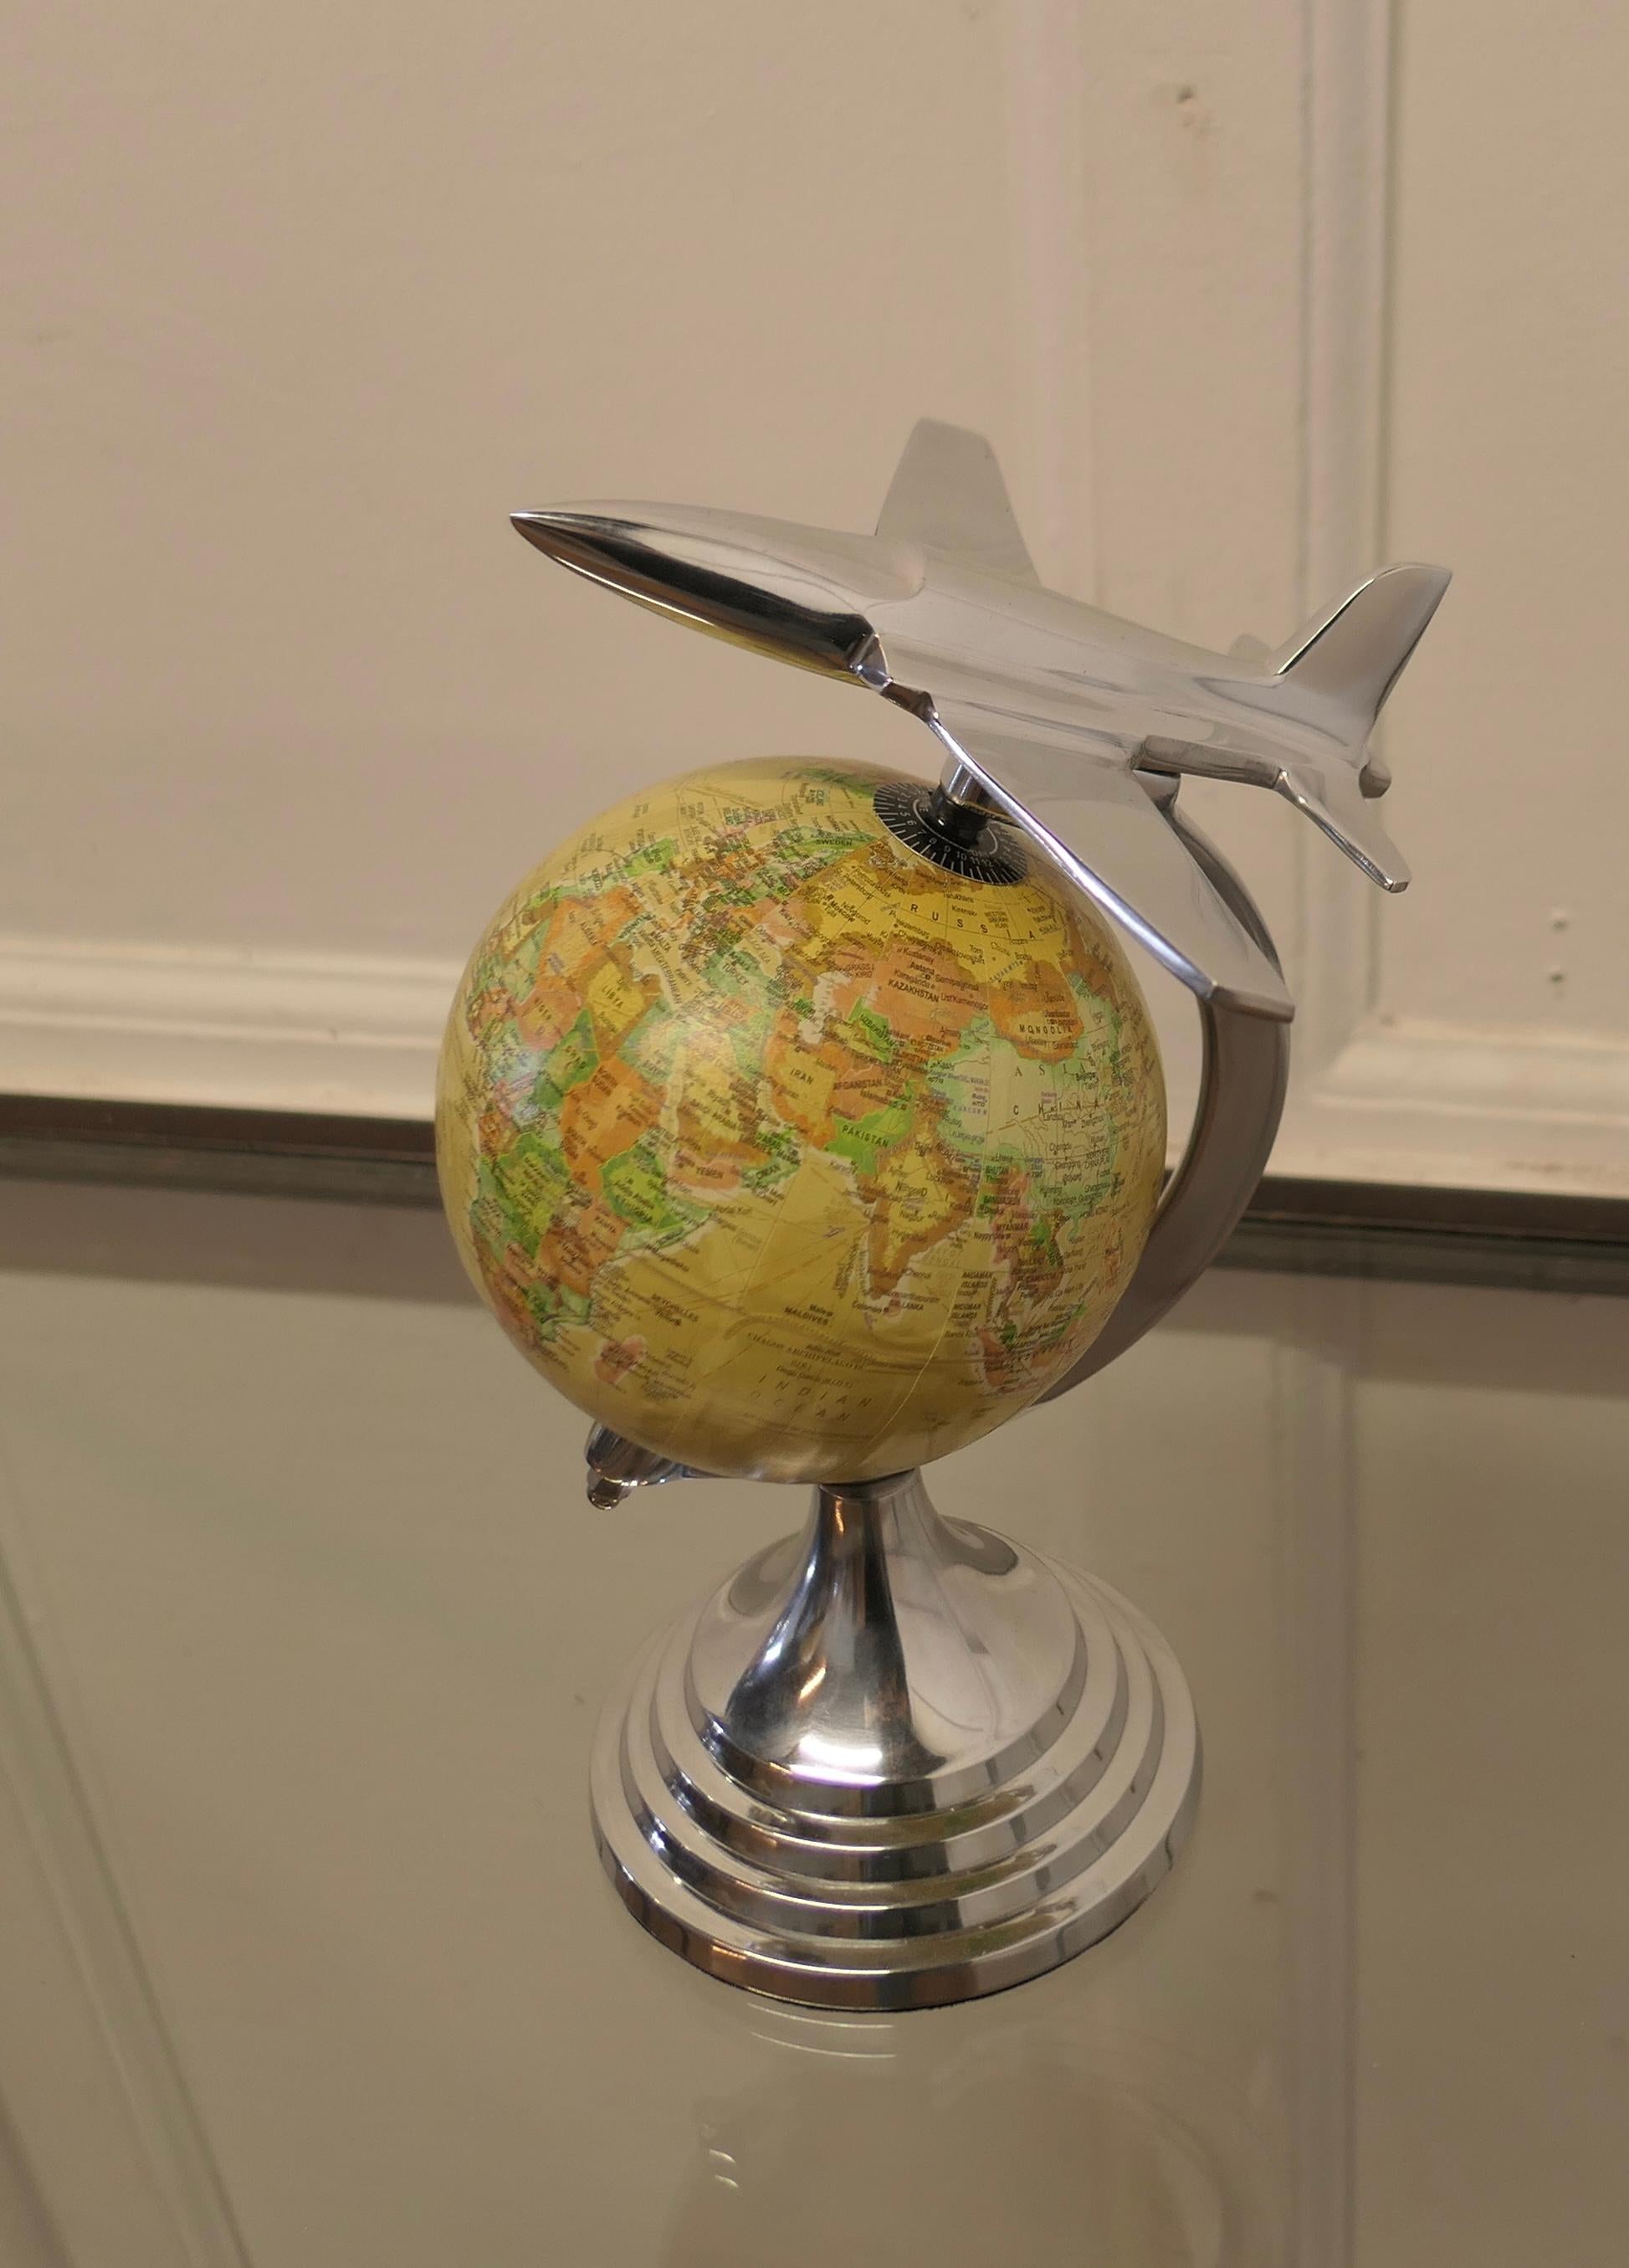  Desk Ornament World Globe with Chrome Model Aeroplane

A super piece and a great desk ornament for the desk that has everything else 
This small globe is set on a chrome stand beneath the superb flight angle of the plane , in very good condition a